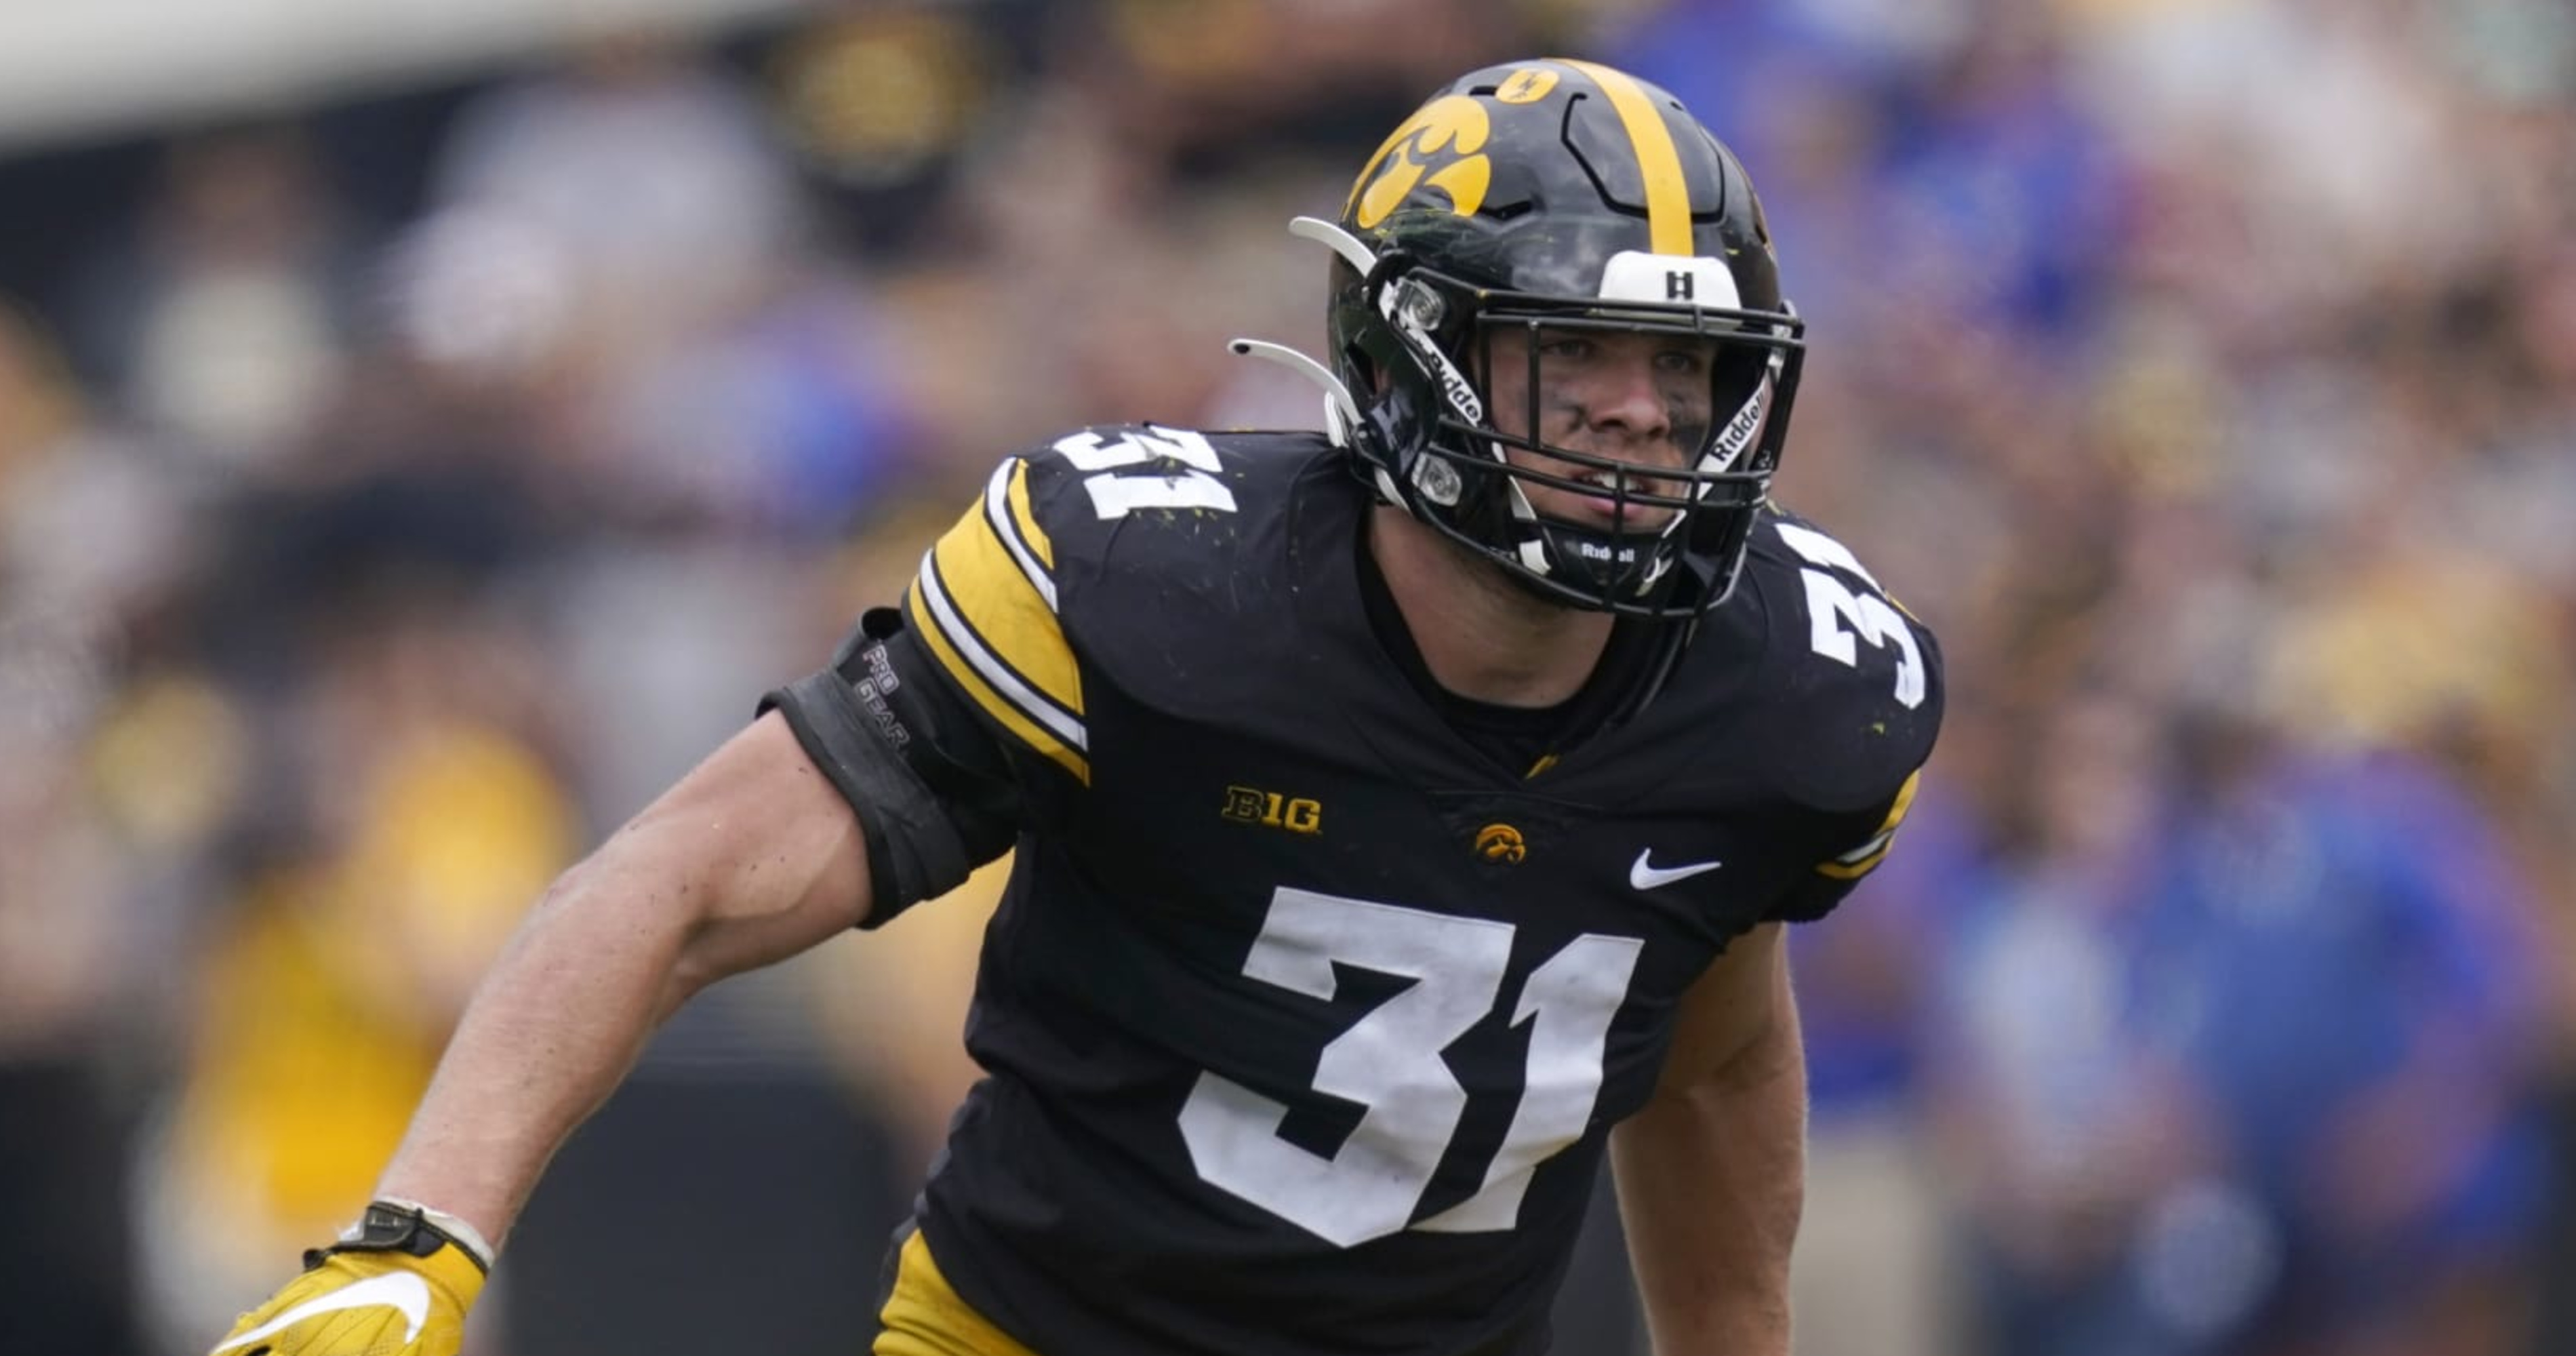 Self-made LB Jack Campbell reaches new heights with Hawkeyes